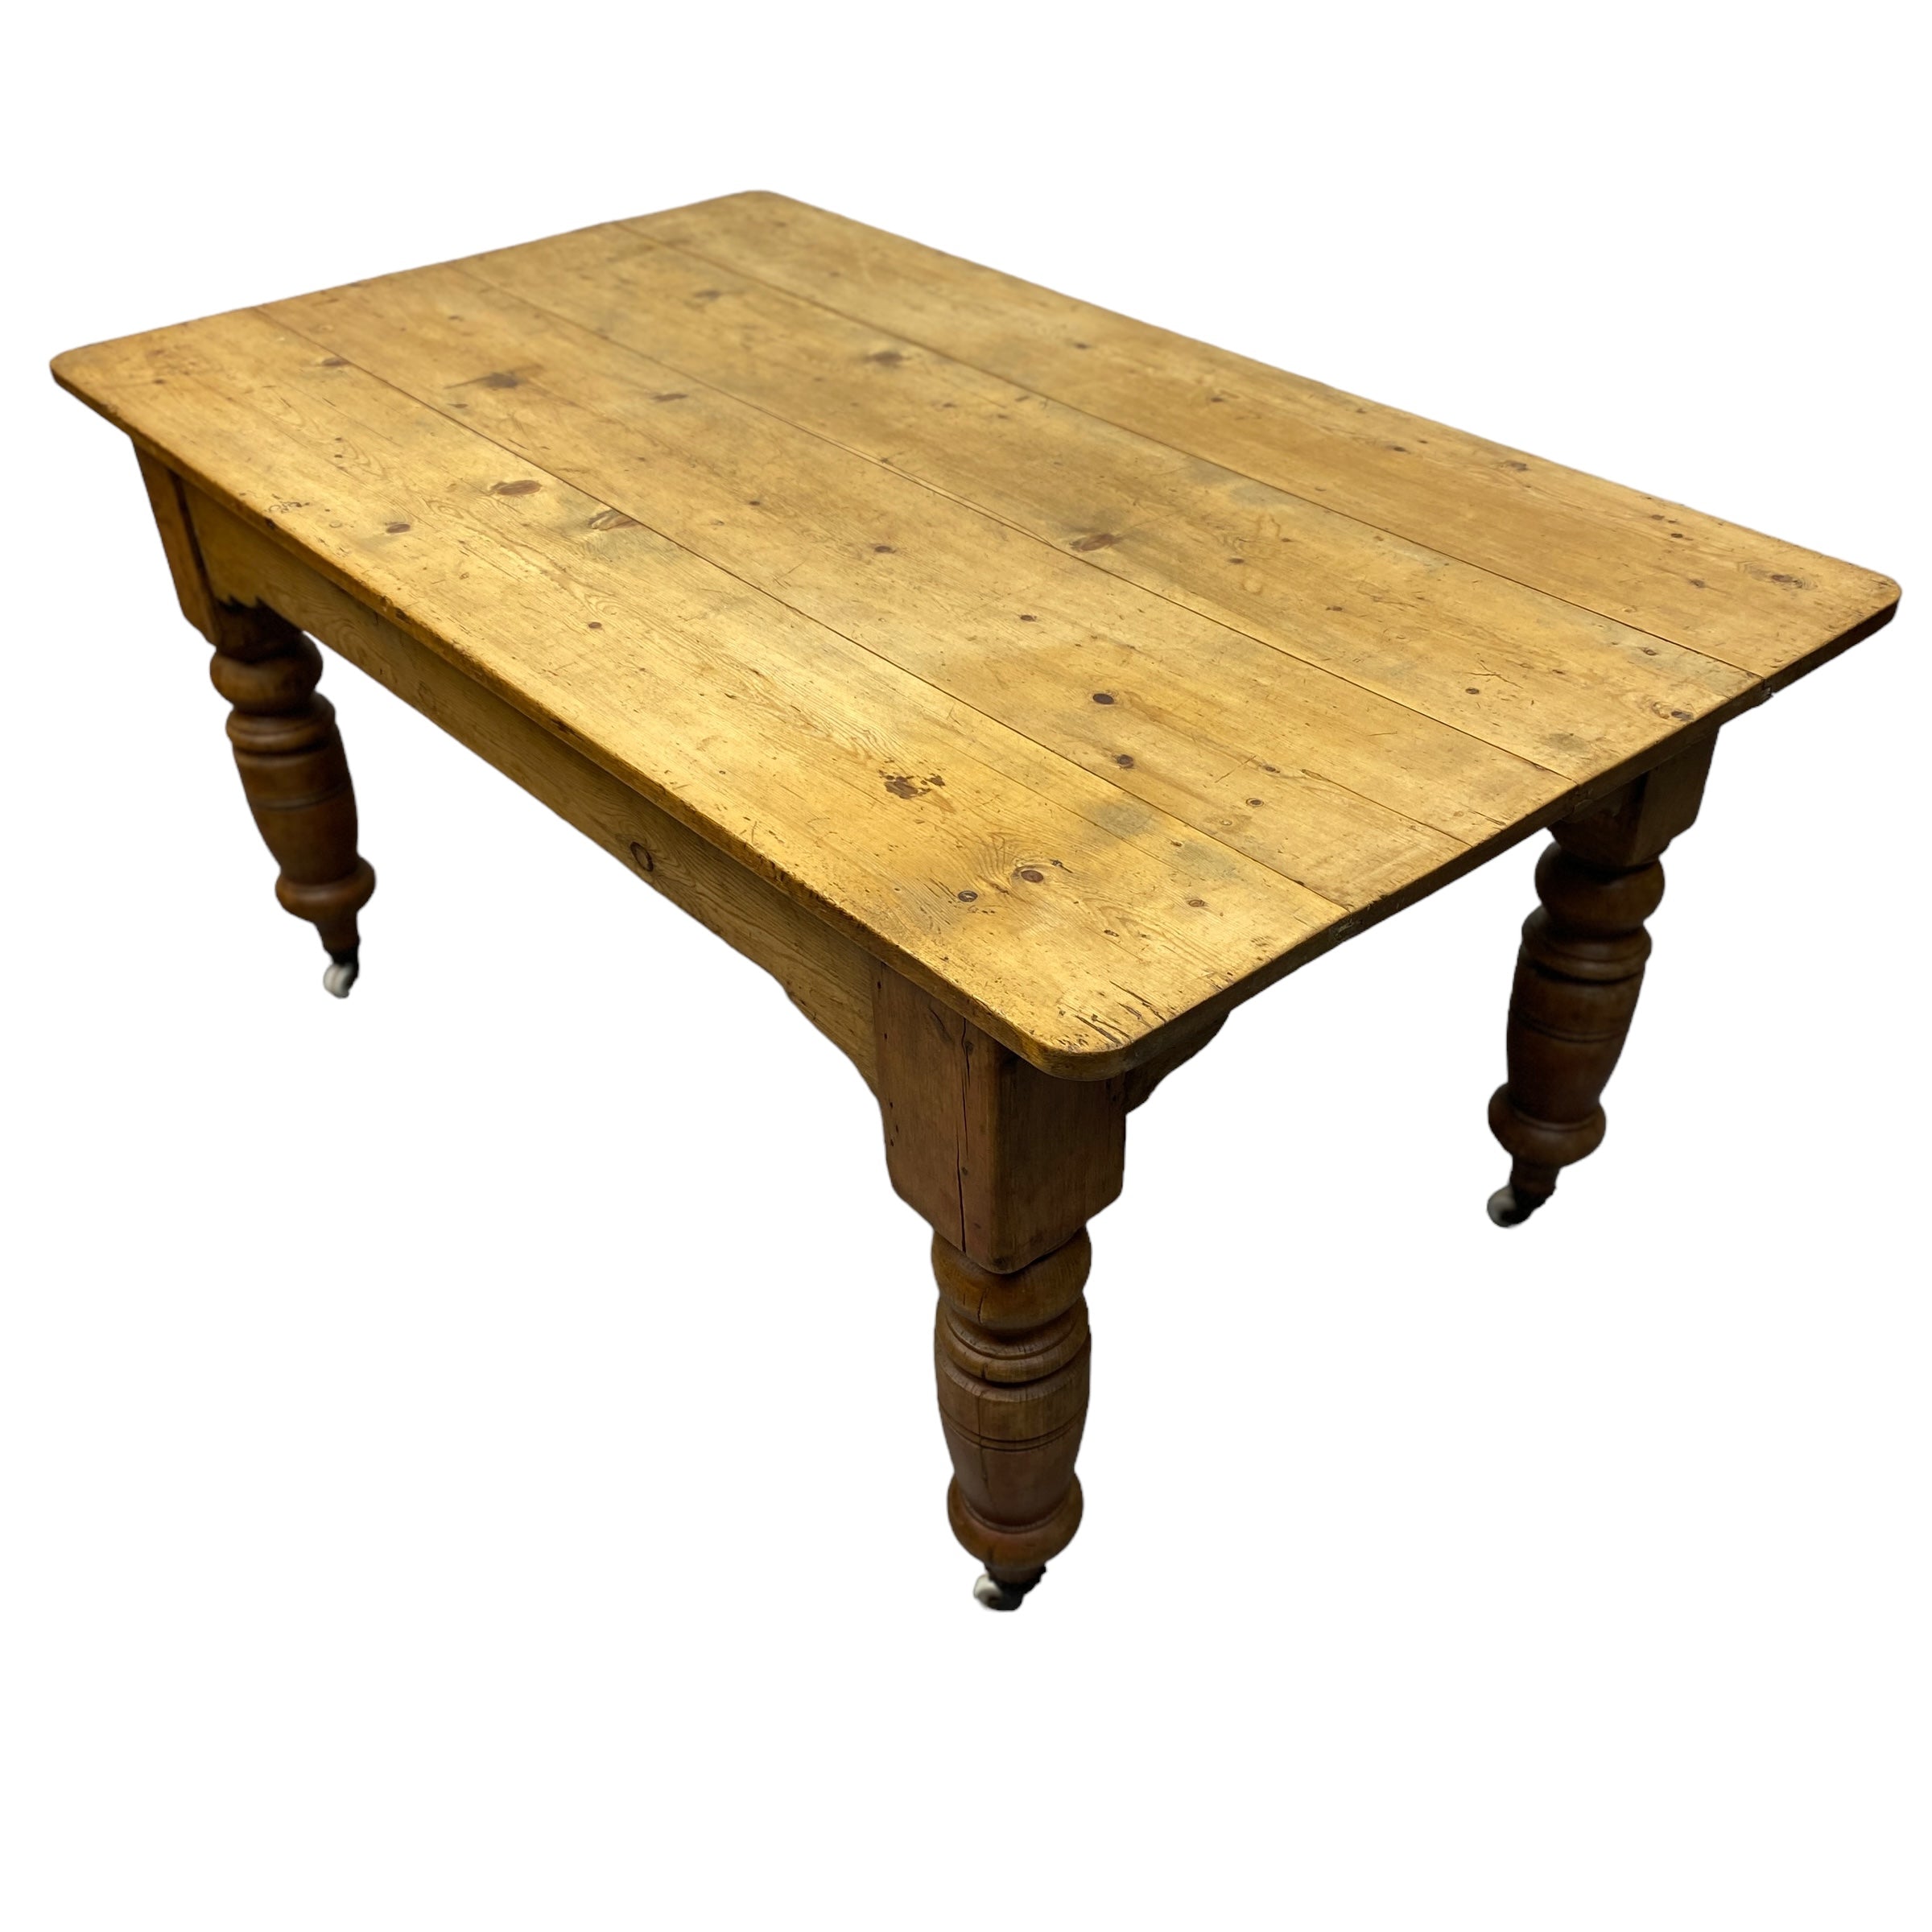 pine dining table